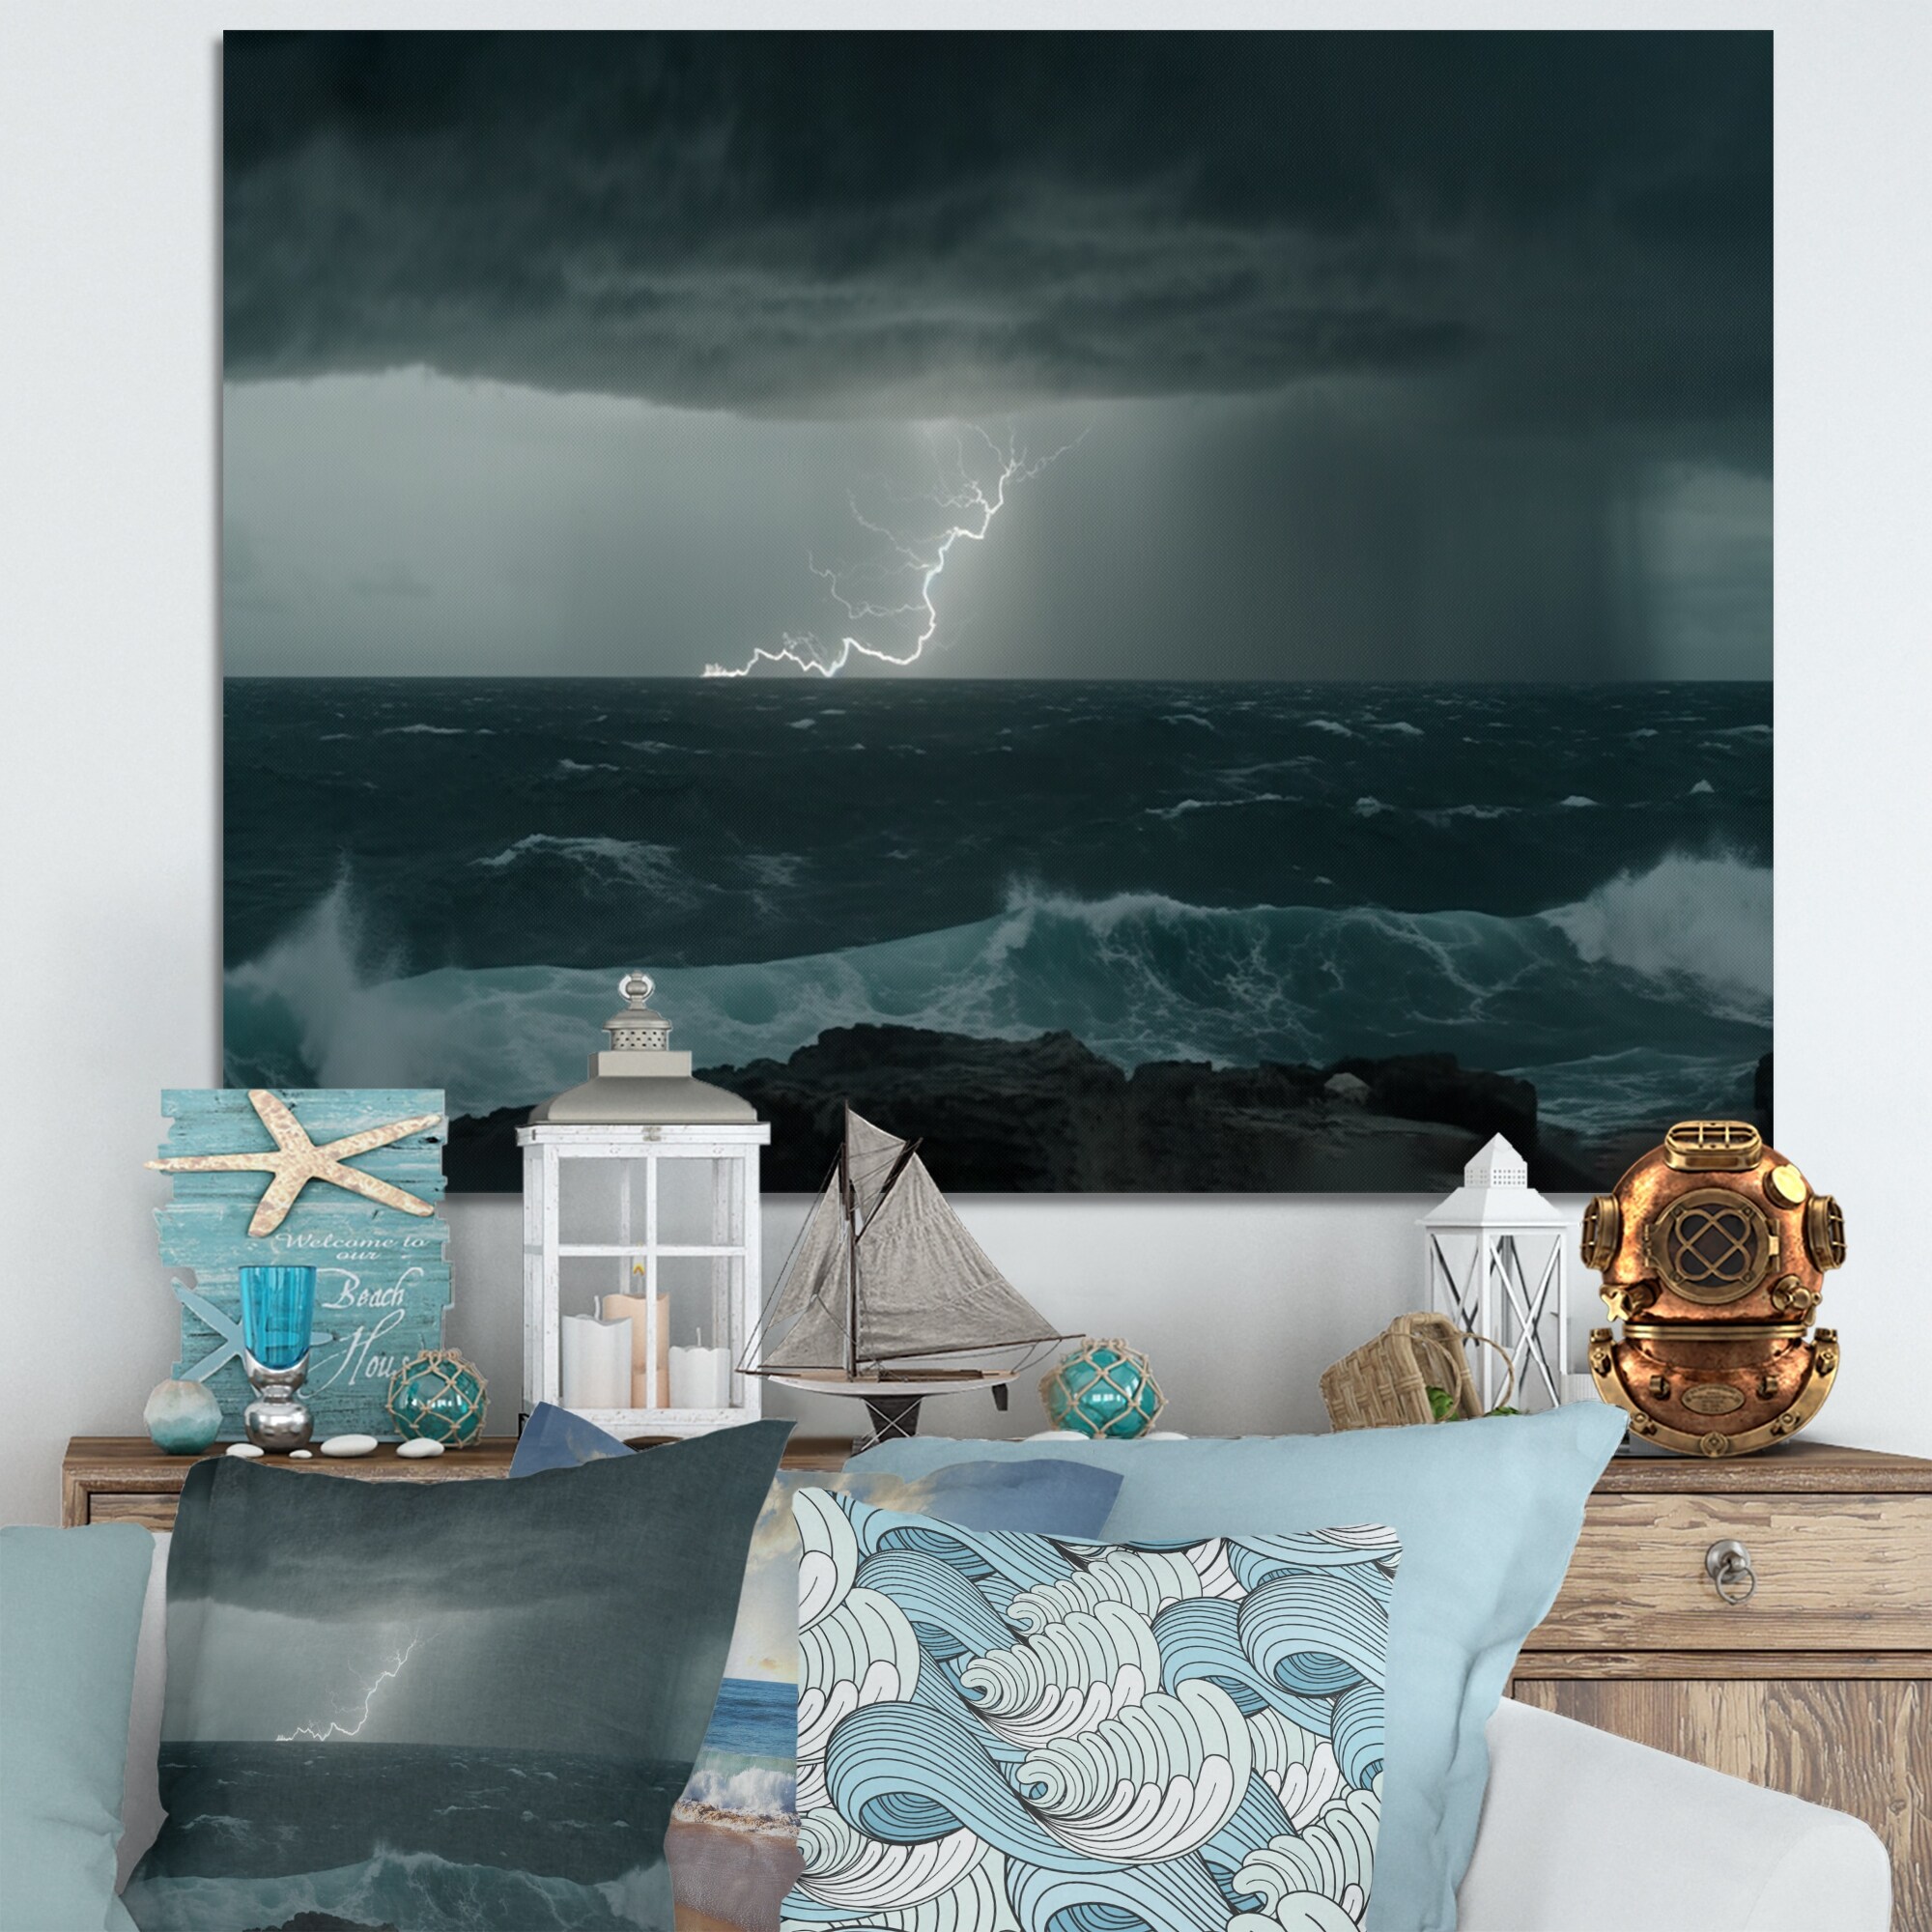 https://ak1.ostkcdn.com/images/products/is/images/direct/07f75ca0be125105ada6c65ec469ab7735bb87b0/Designart-%22Thunderstorm-Of-The-Sea-I%22-Modern-Landscape-Beach-Wall-Art-For-Living-Room.jpg